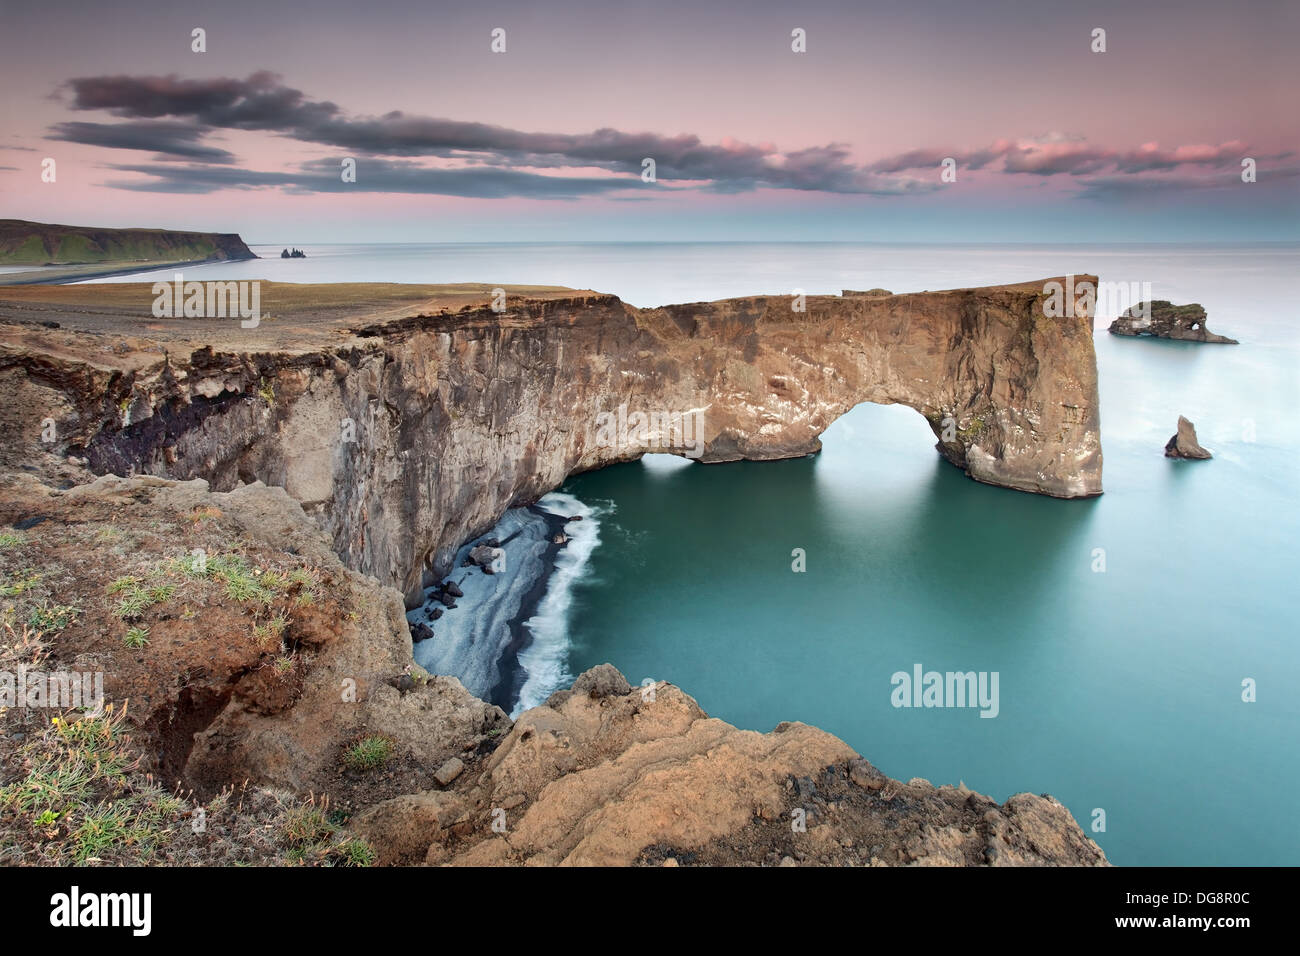 The headland and arches of Dyrholaey, southernmost point in Iceland. Stock Photo